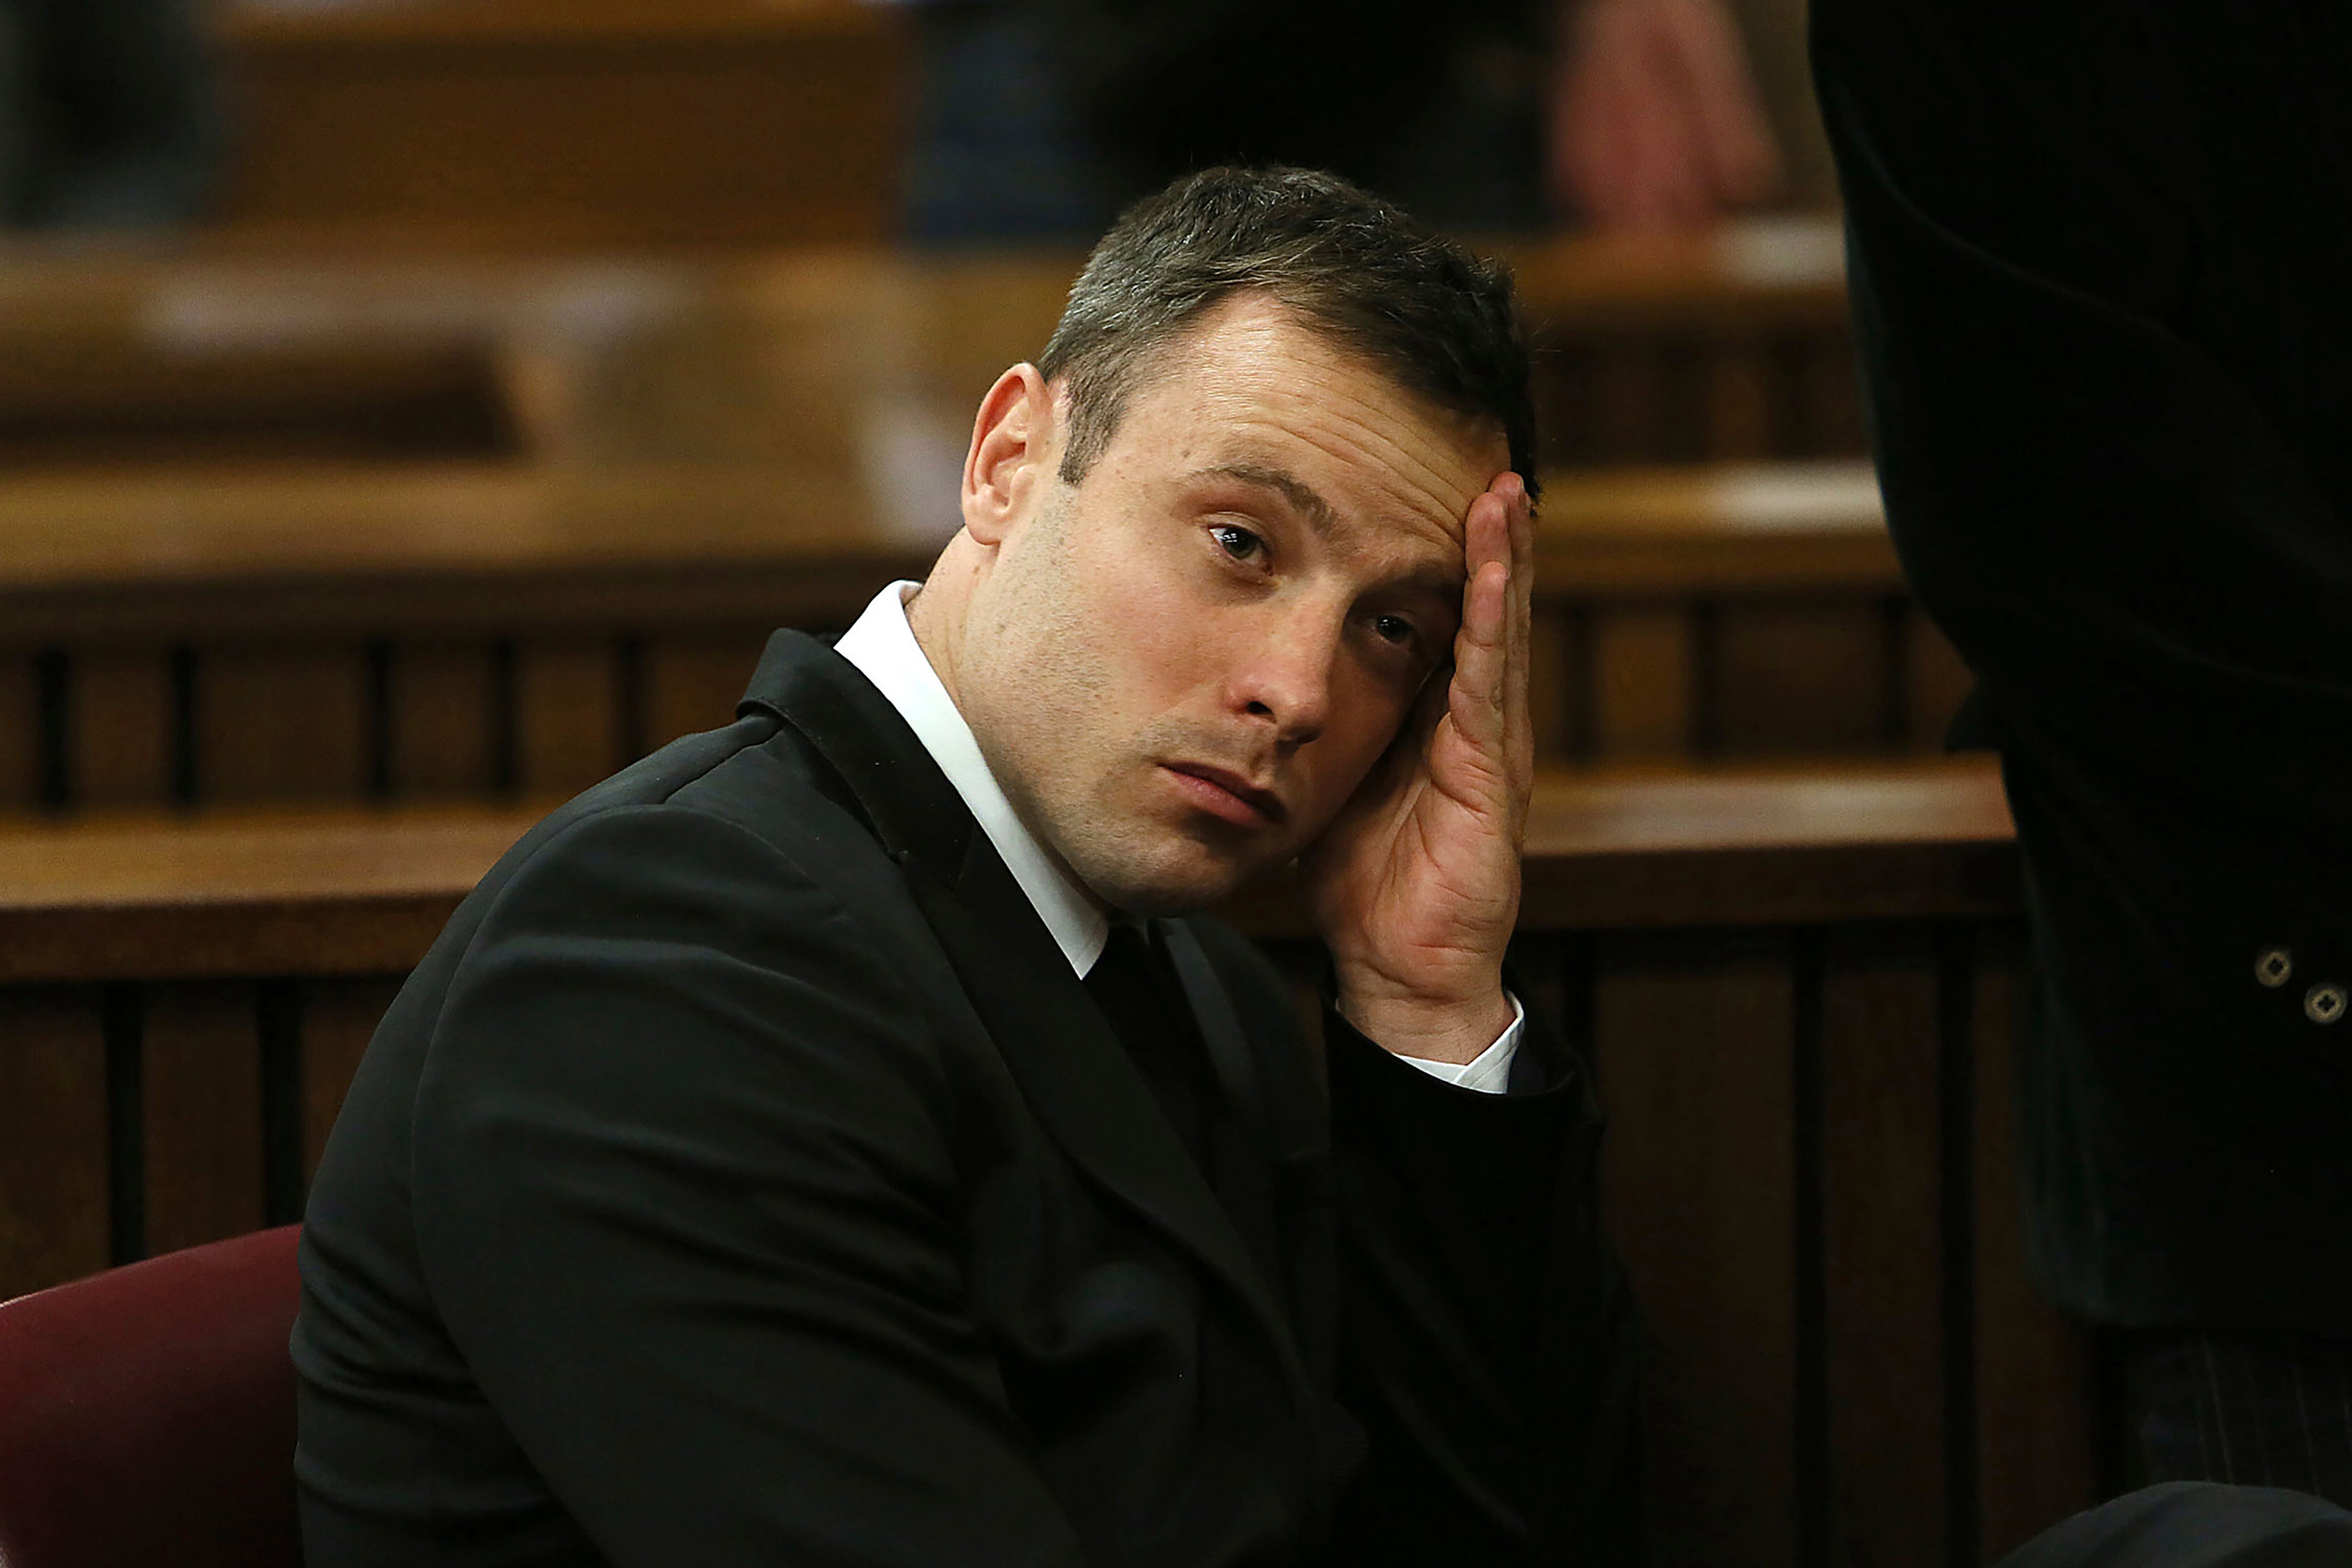 Pistorius claimed he thought an intruder was in the bathroom when he fired four shots through the door, killing Ms Steenkamp